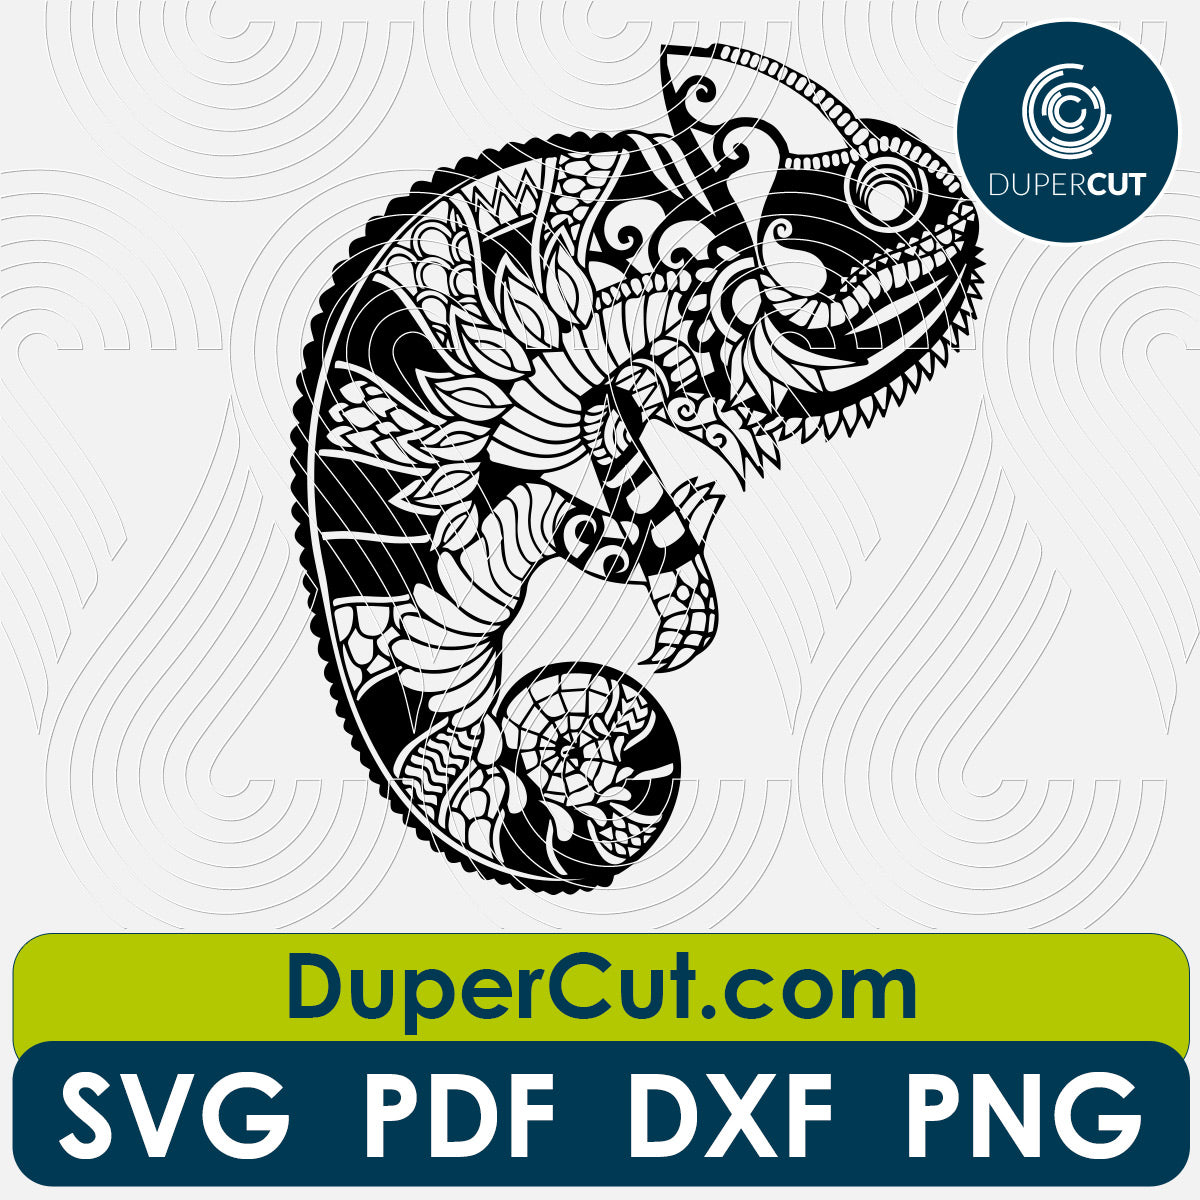 Zentangle abstract chameleon - SVG DXF laser cutting vector files by DuperCut.com